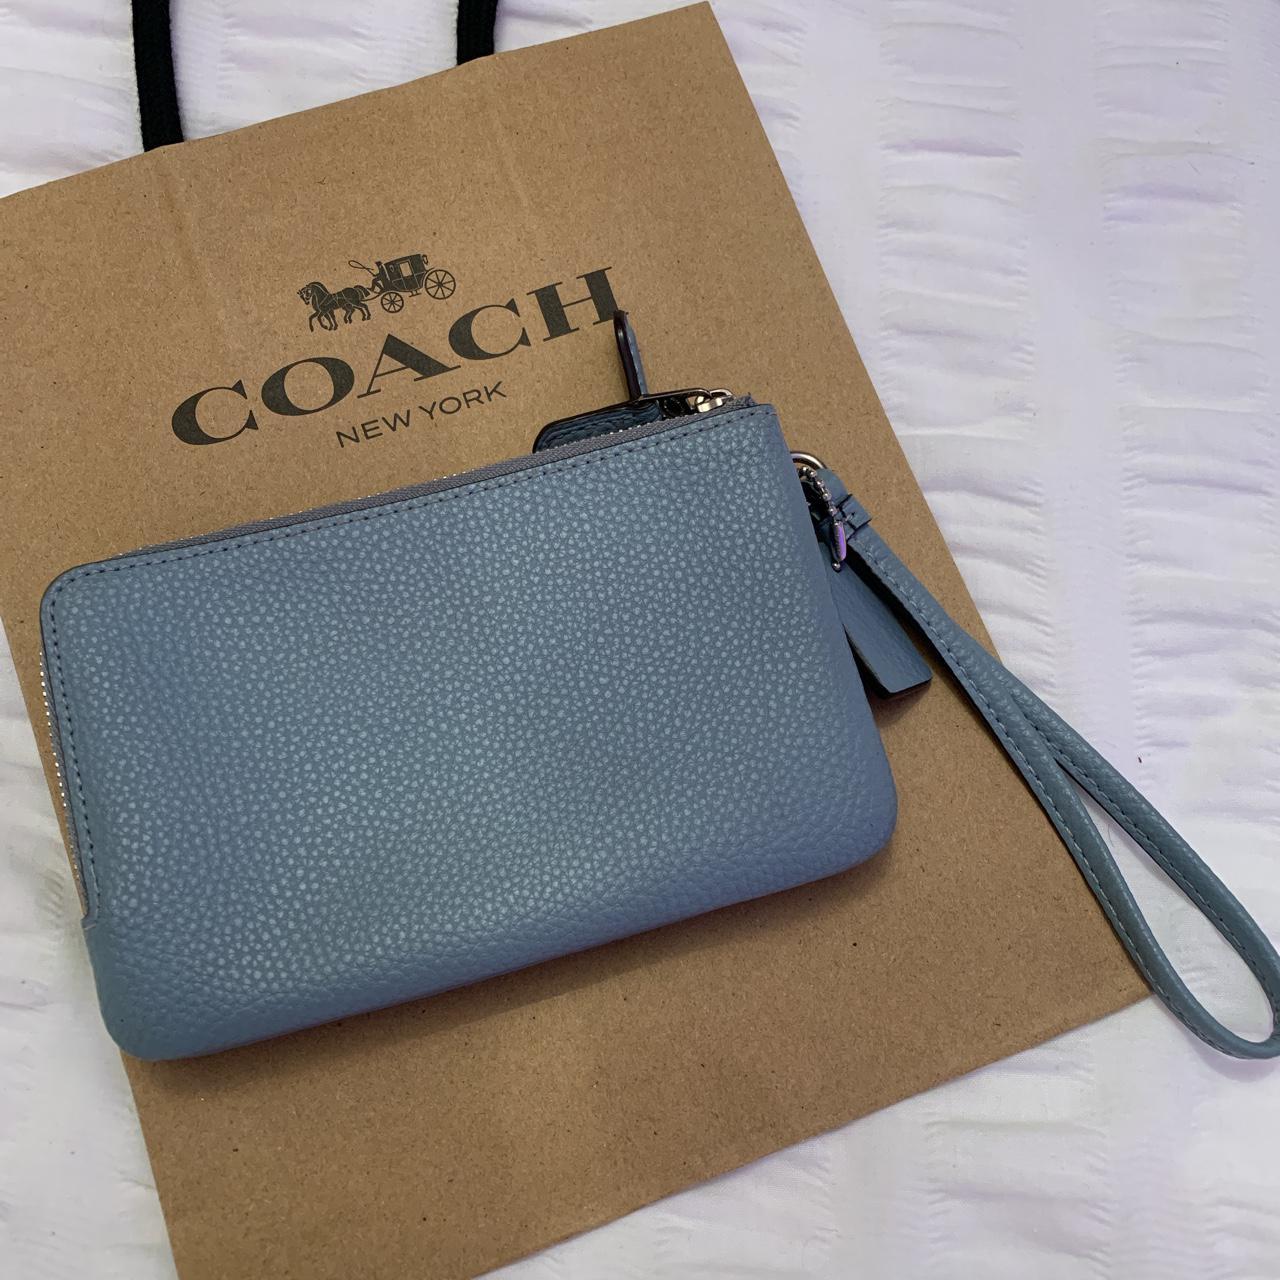 Product Image 3 - Coach dusty blue purse/wallet with